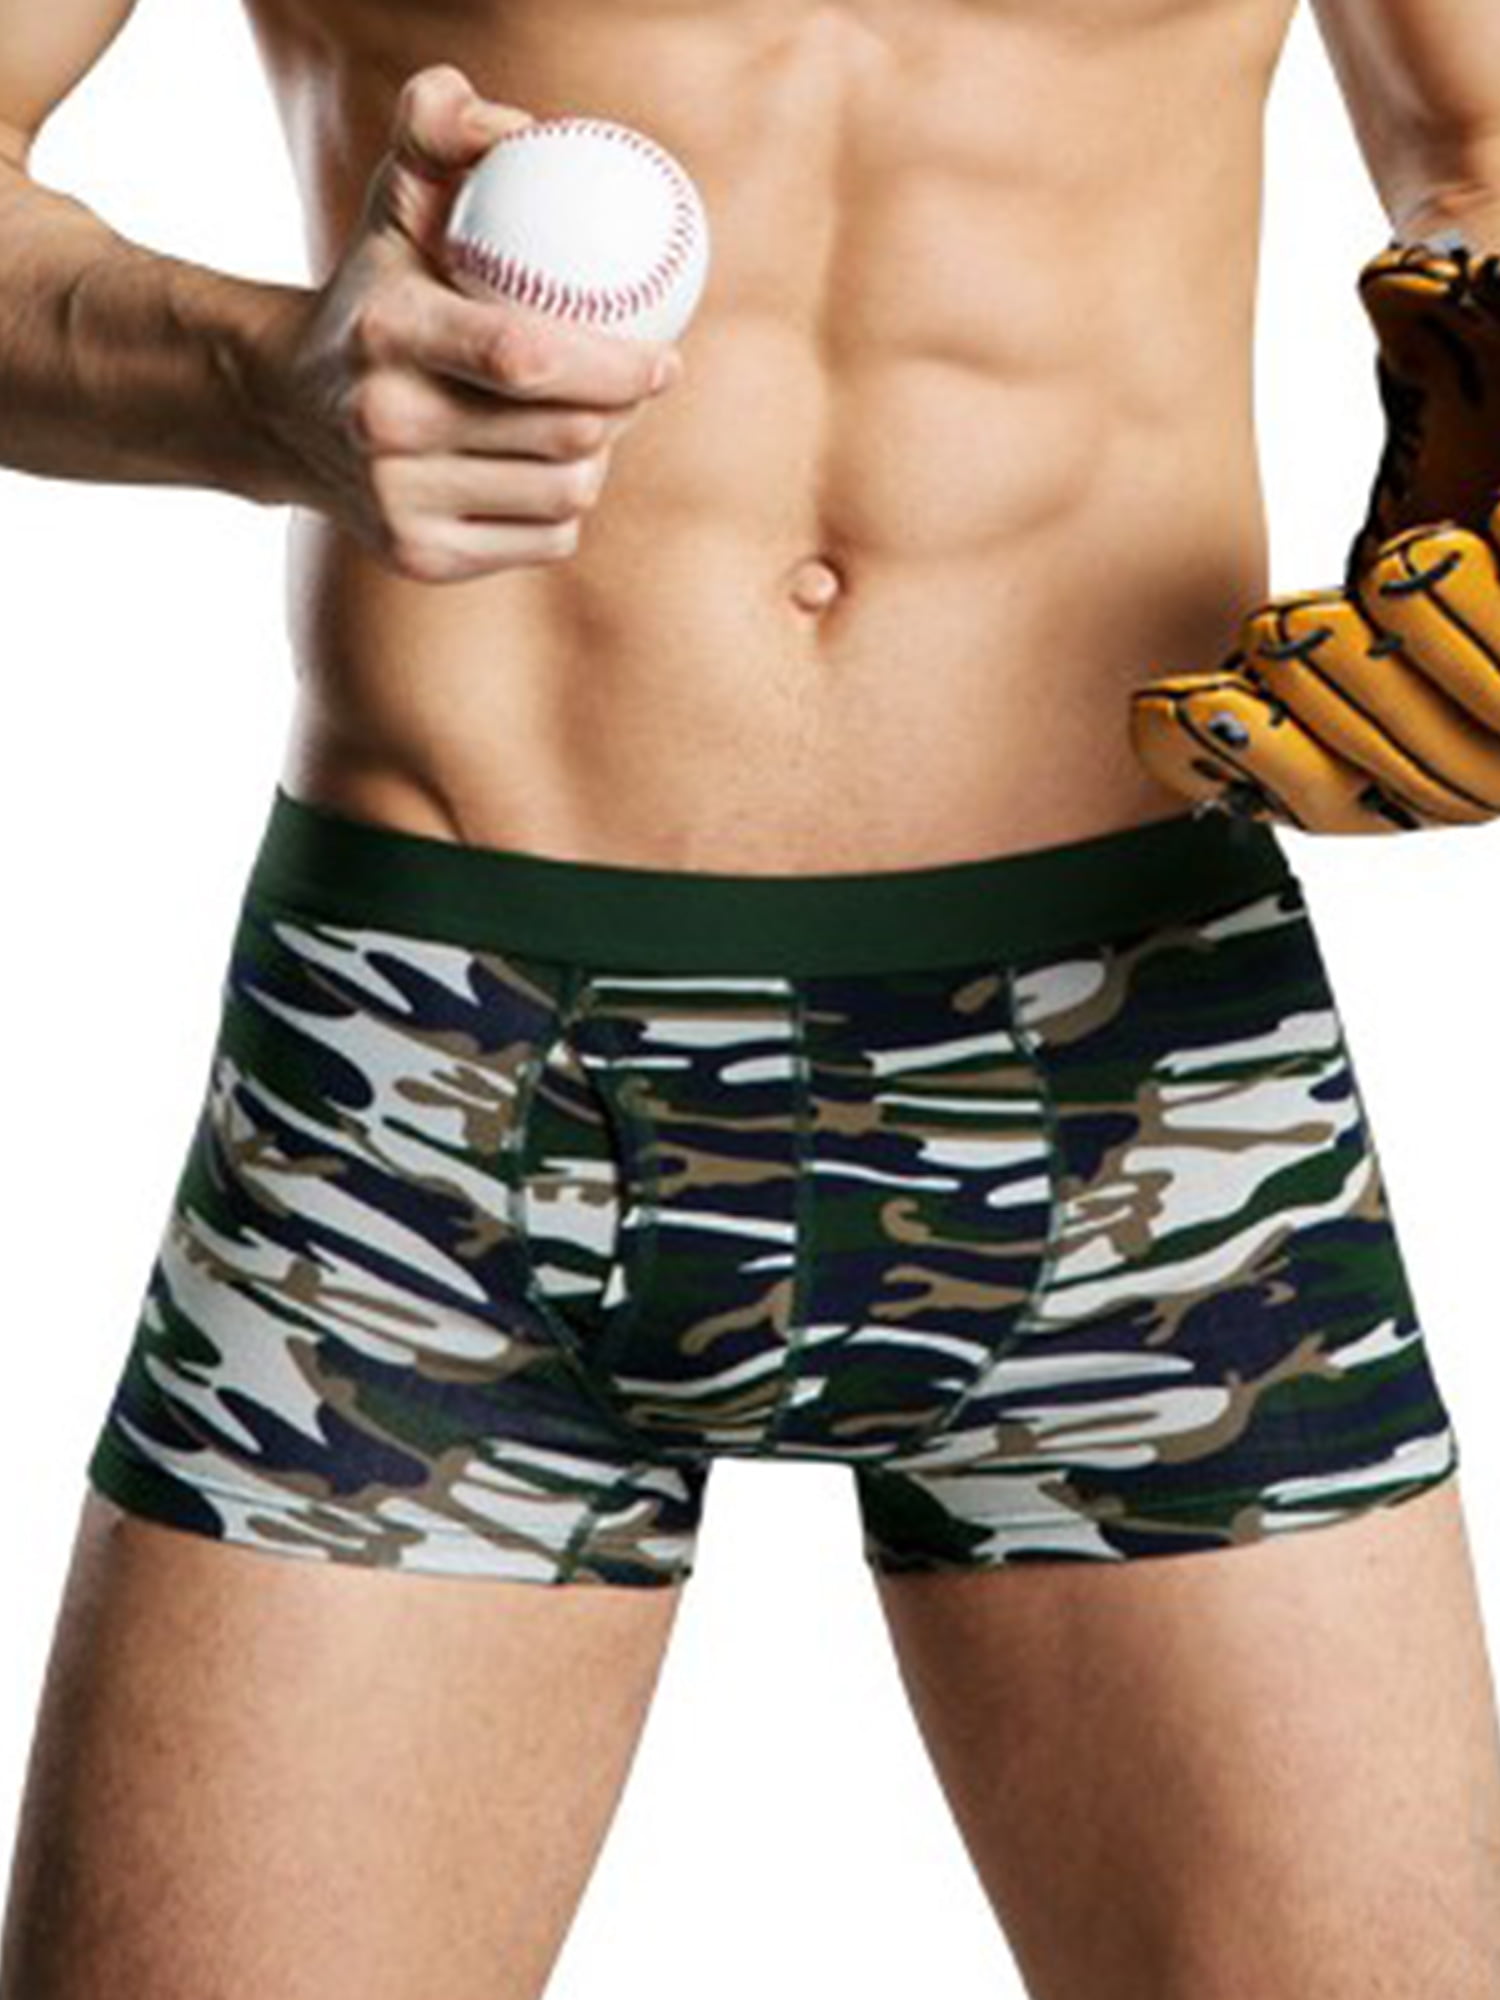 Mens Camouflage Shorts Boxers 3 6 9 12  in Pack Undergarments Small to 2XL LOT